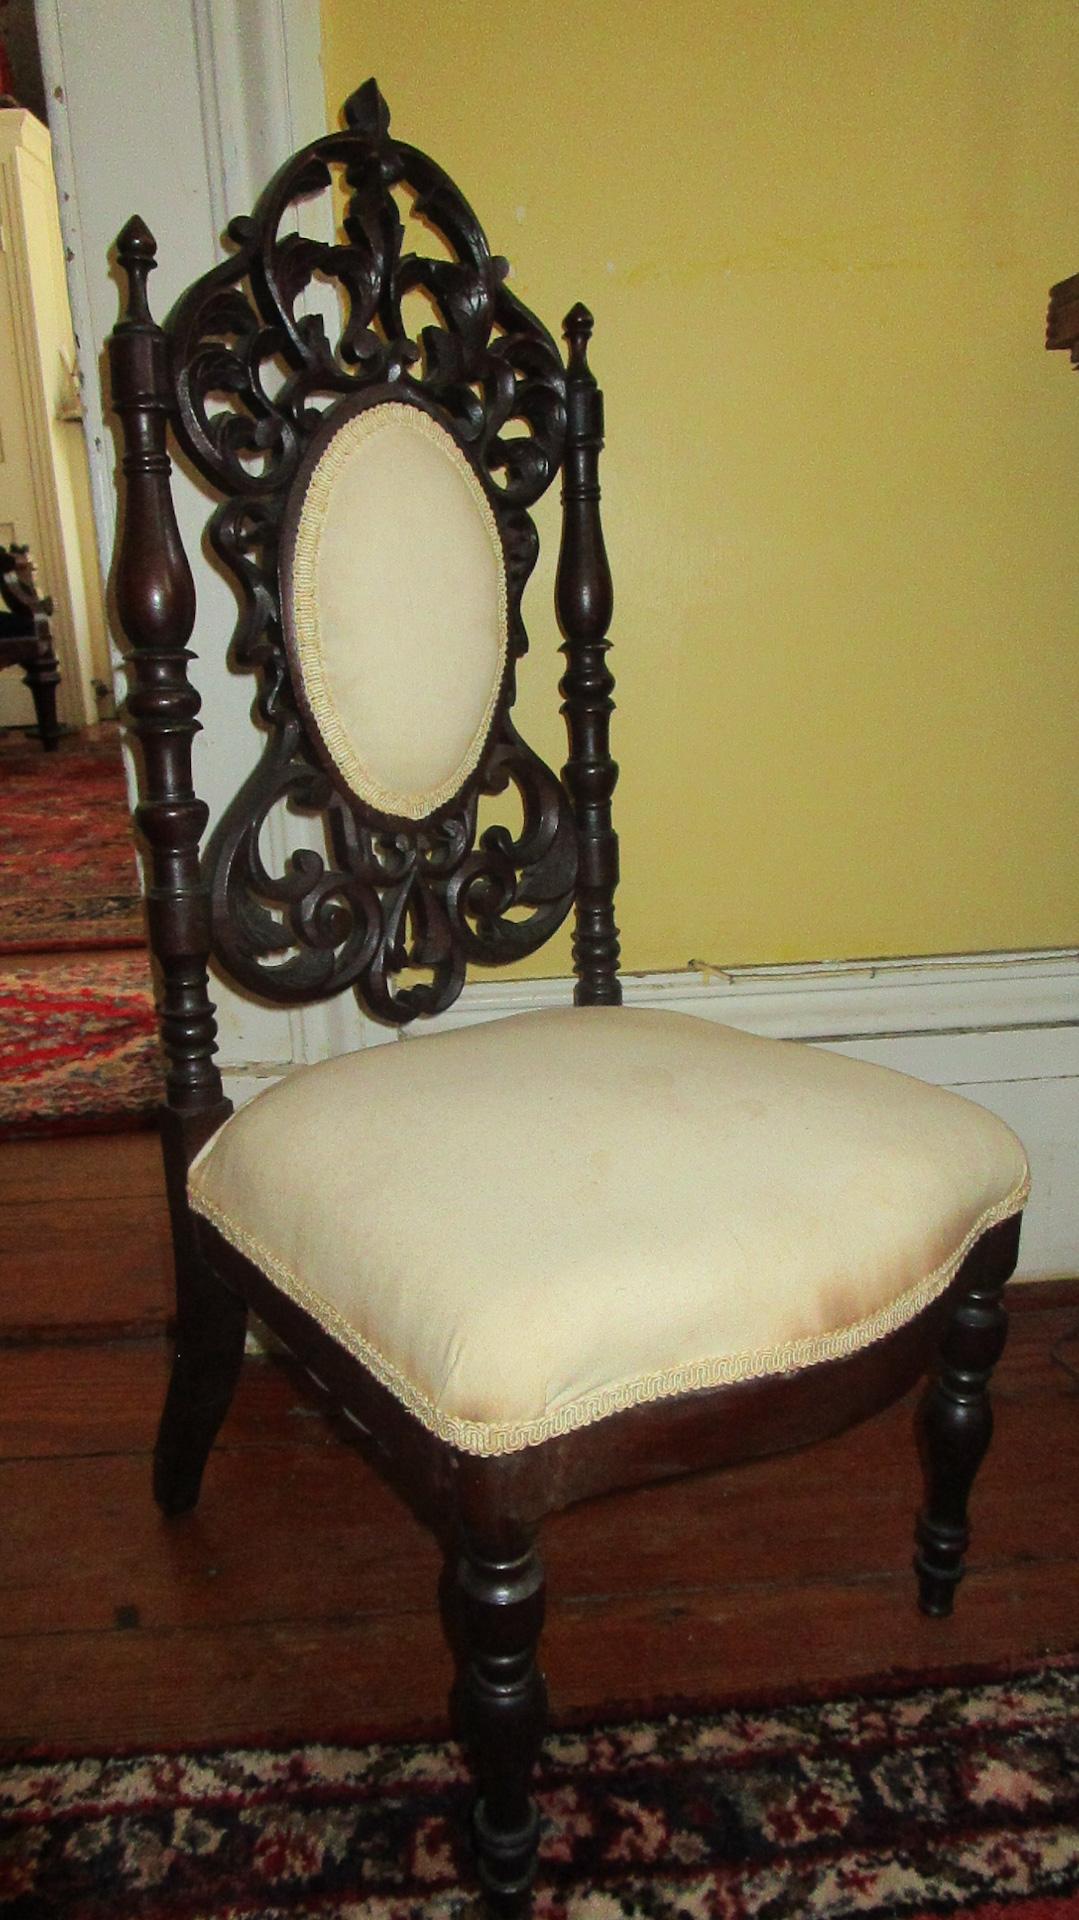 Mid-19th Century 19th c. American Mahogany Rococo Revival Child's Chair with Tracery Back For Sale